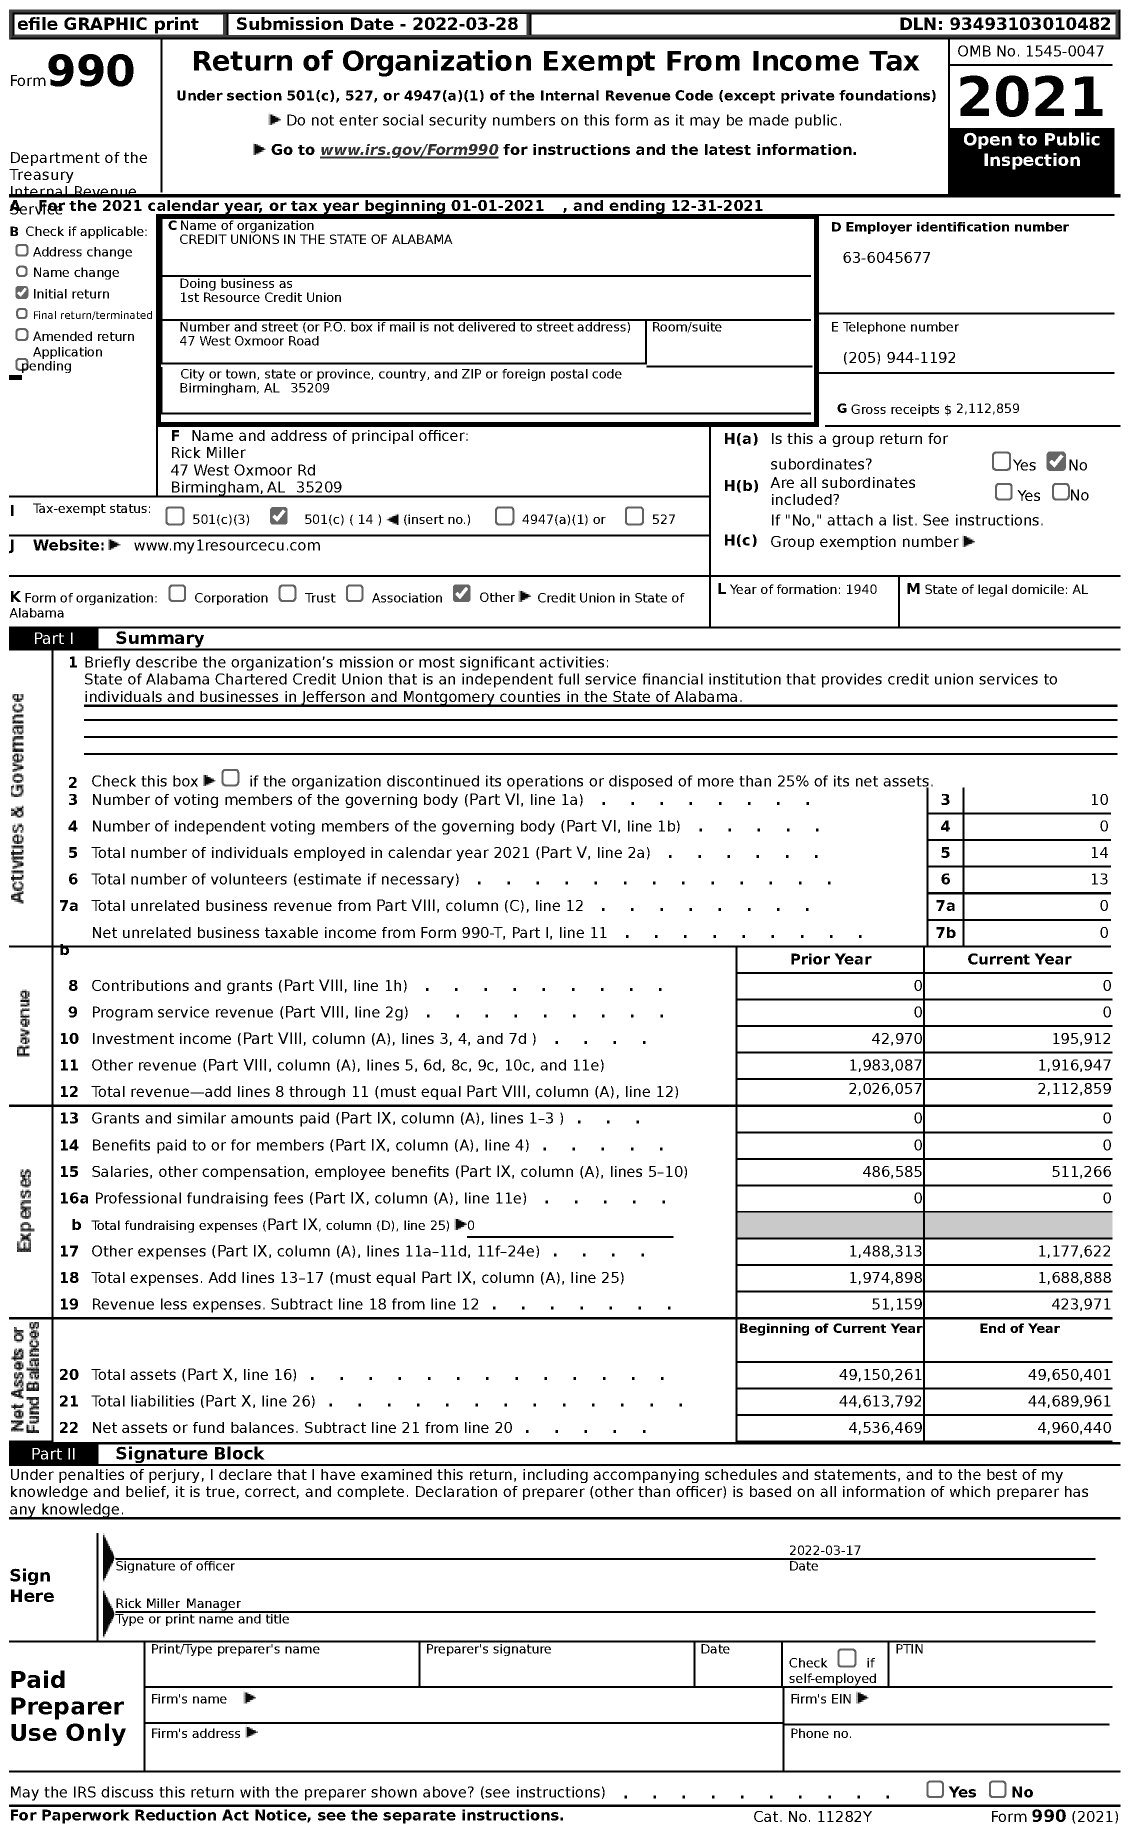 Image of first page of 2021 Form 990 for 1st Resource Credit Union